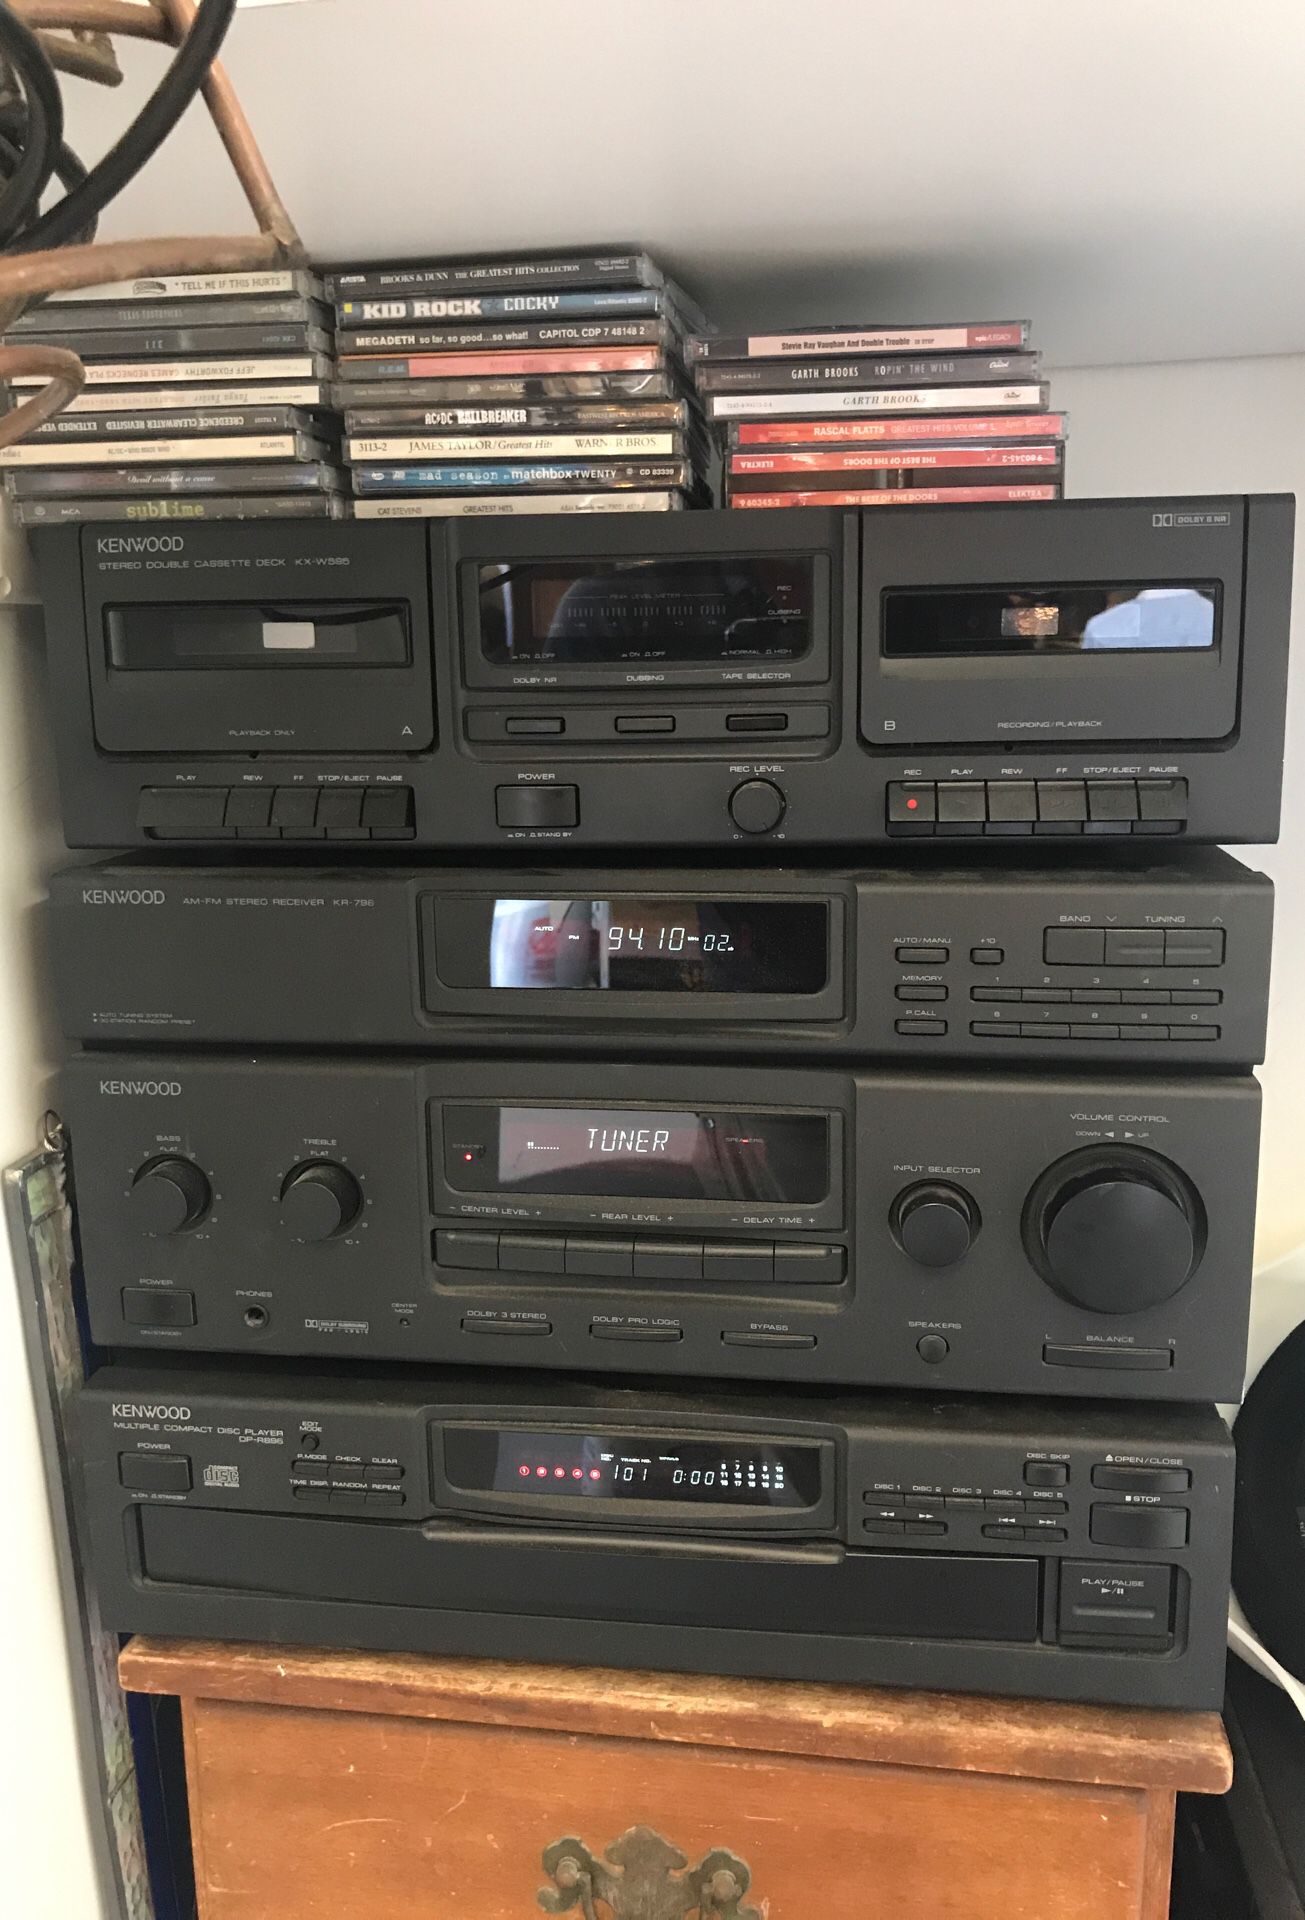 Complete Kenwood stereo system- 5 disc CD changer, works great- WITH 5 SPEAKERS!